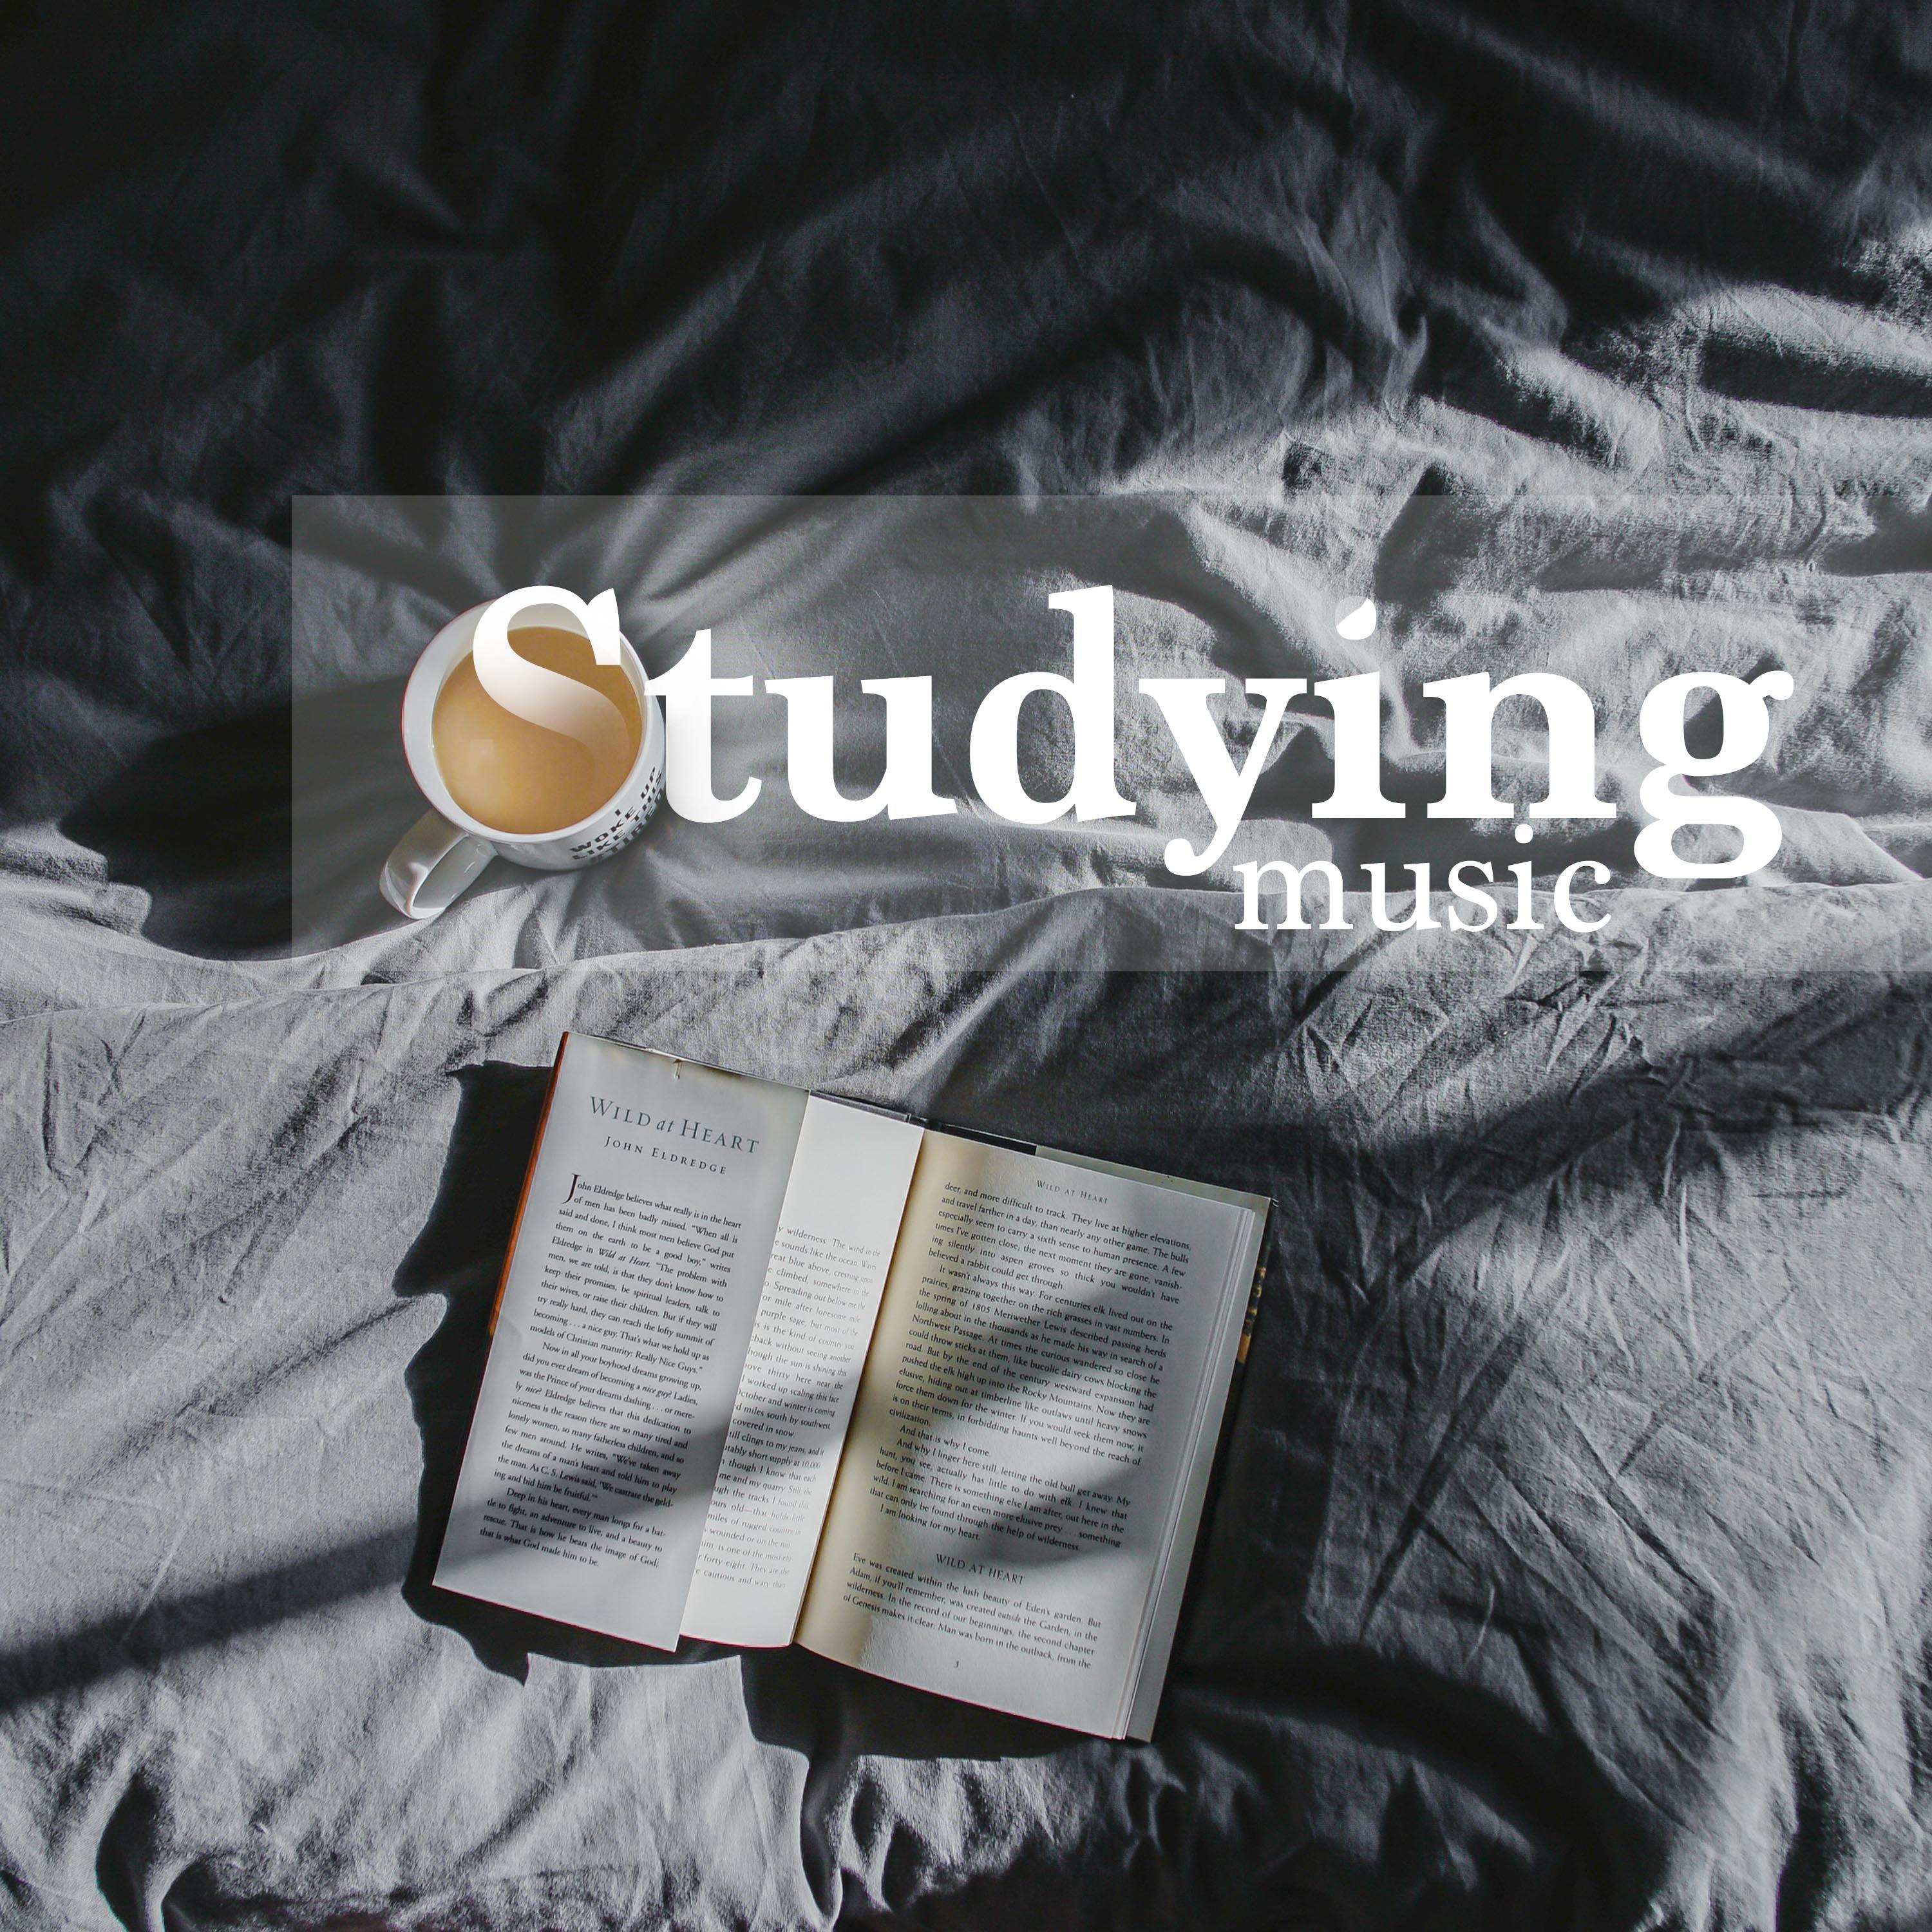 Studying - Concentration Music (New Age Piano Melodies and Relaxing Music), Nature Sounds